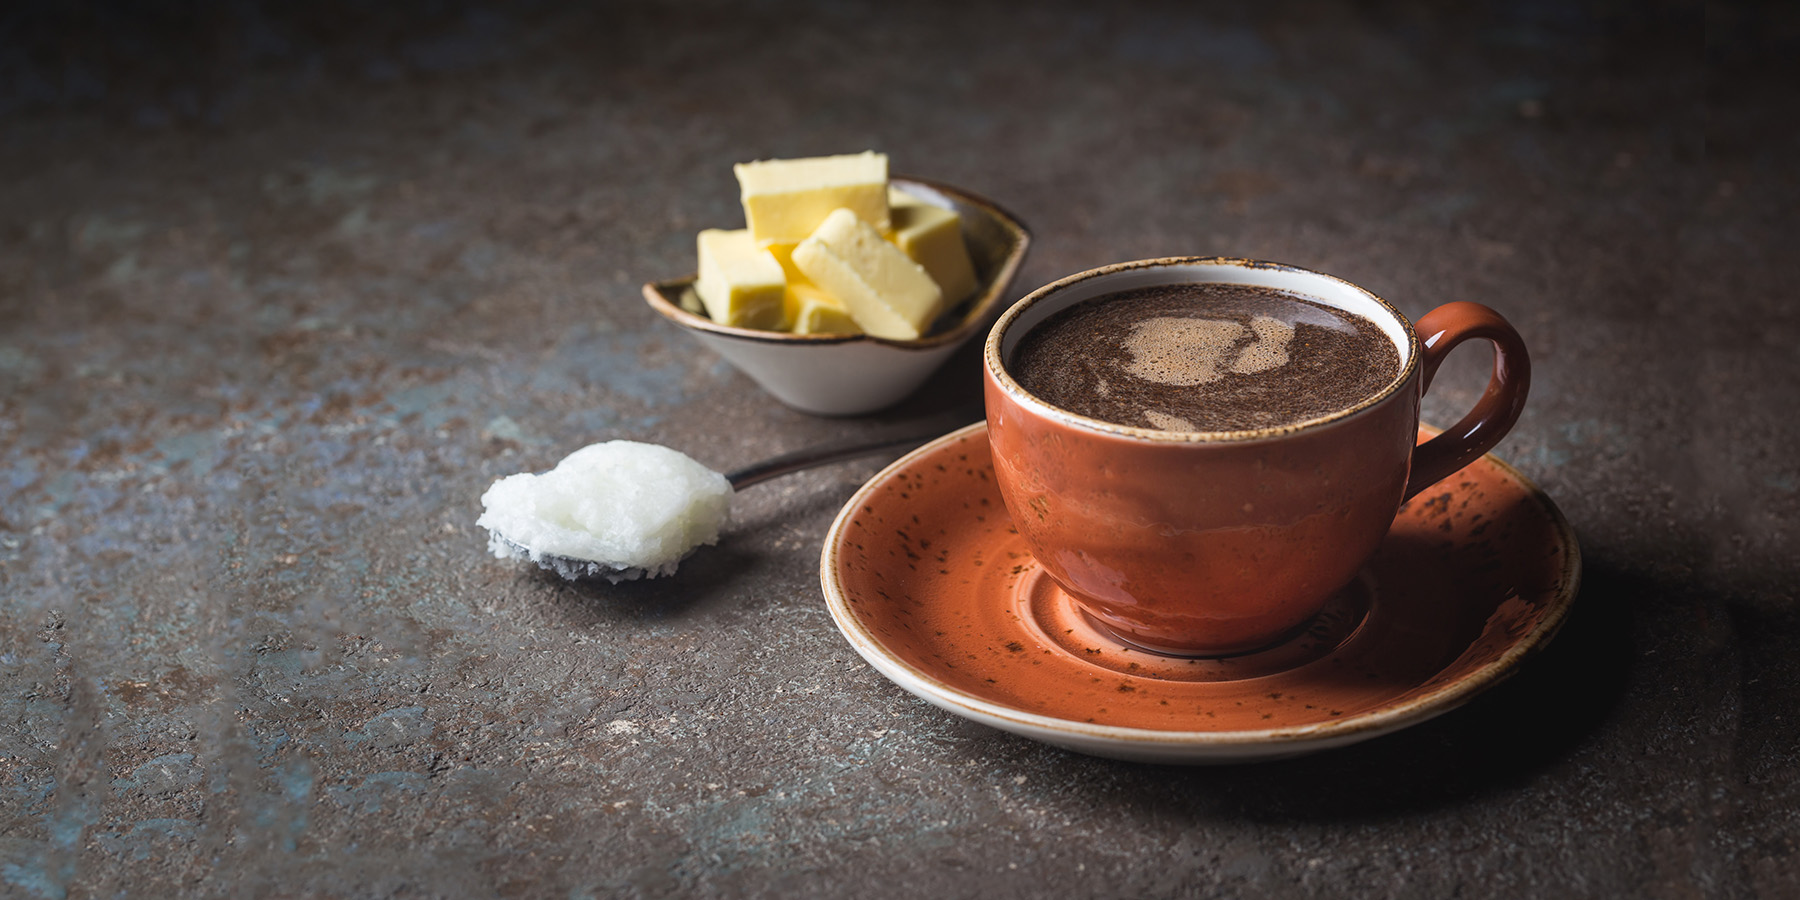 What is Bulletproof coffee and is it good for you? - CNET